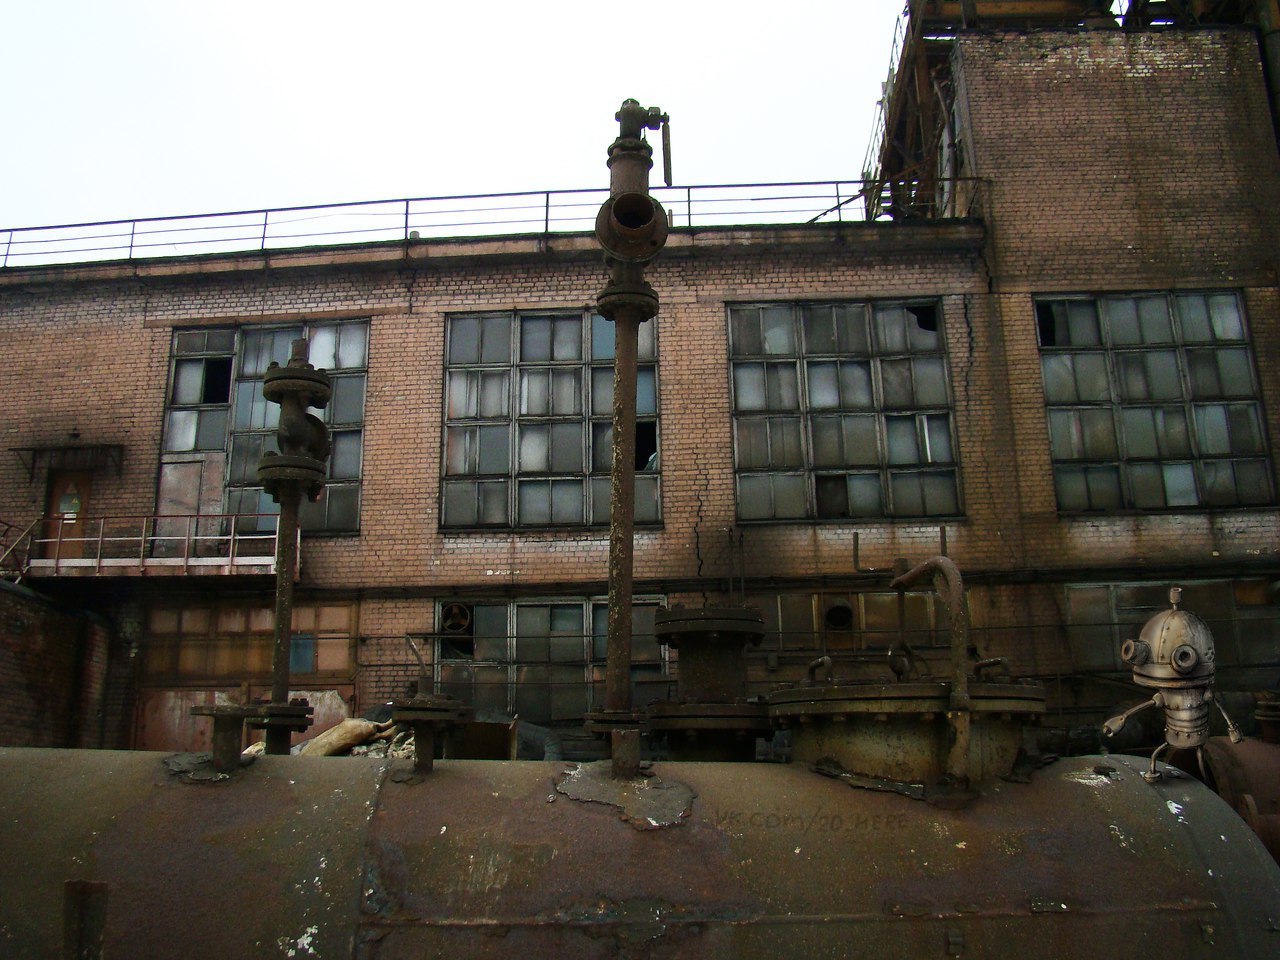 Hey, are you out of ideas for Machinarium 2? Pick any abandoned plant in Russia for inspiration!